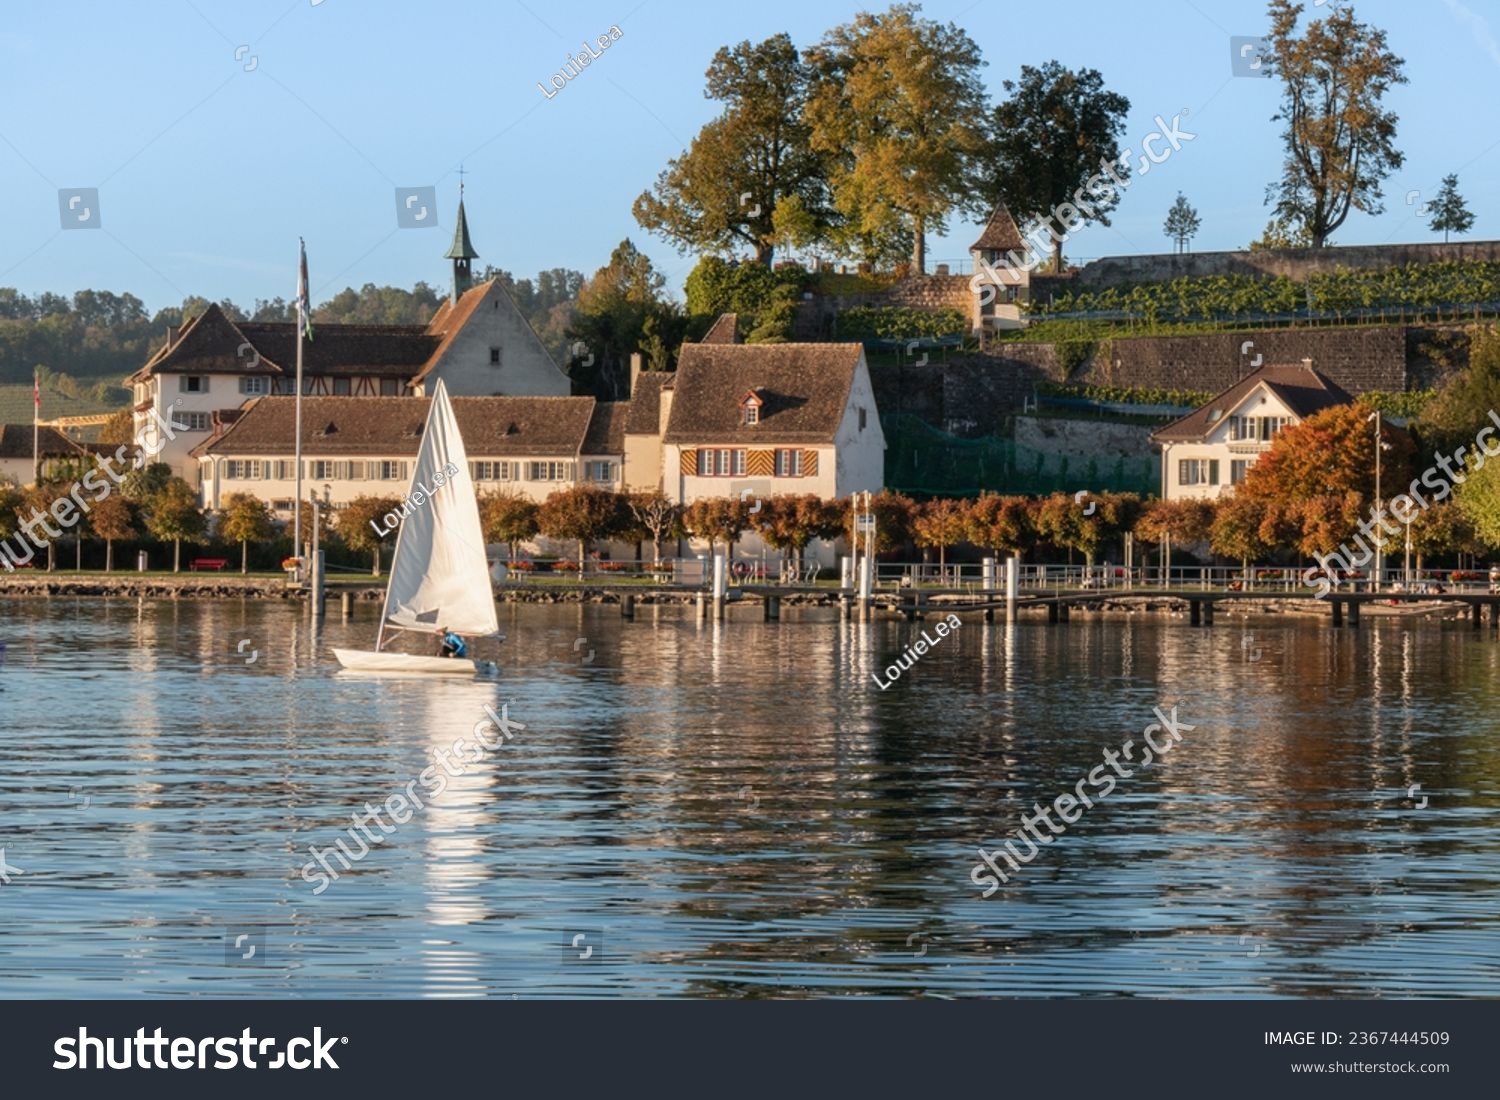 Sailing on the shoures of the Zurich Lake, Rapperswil, St Gallen, Switzerland #2367444509